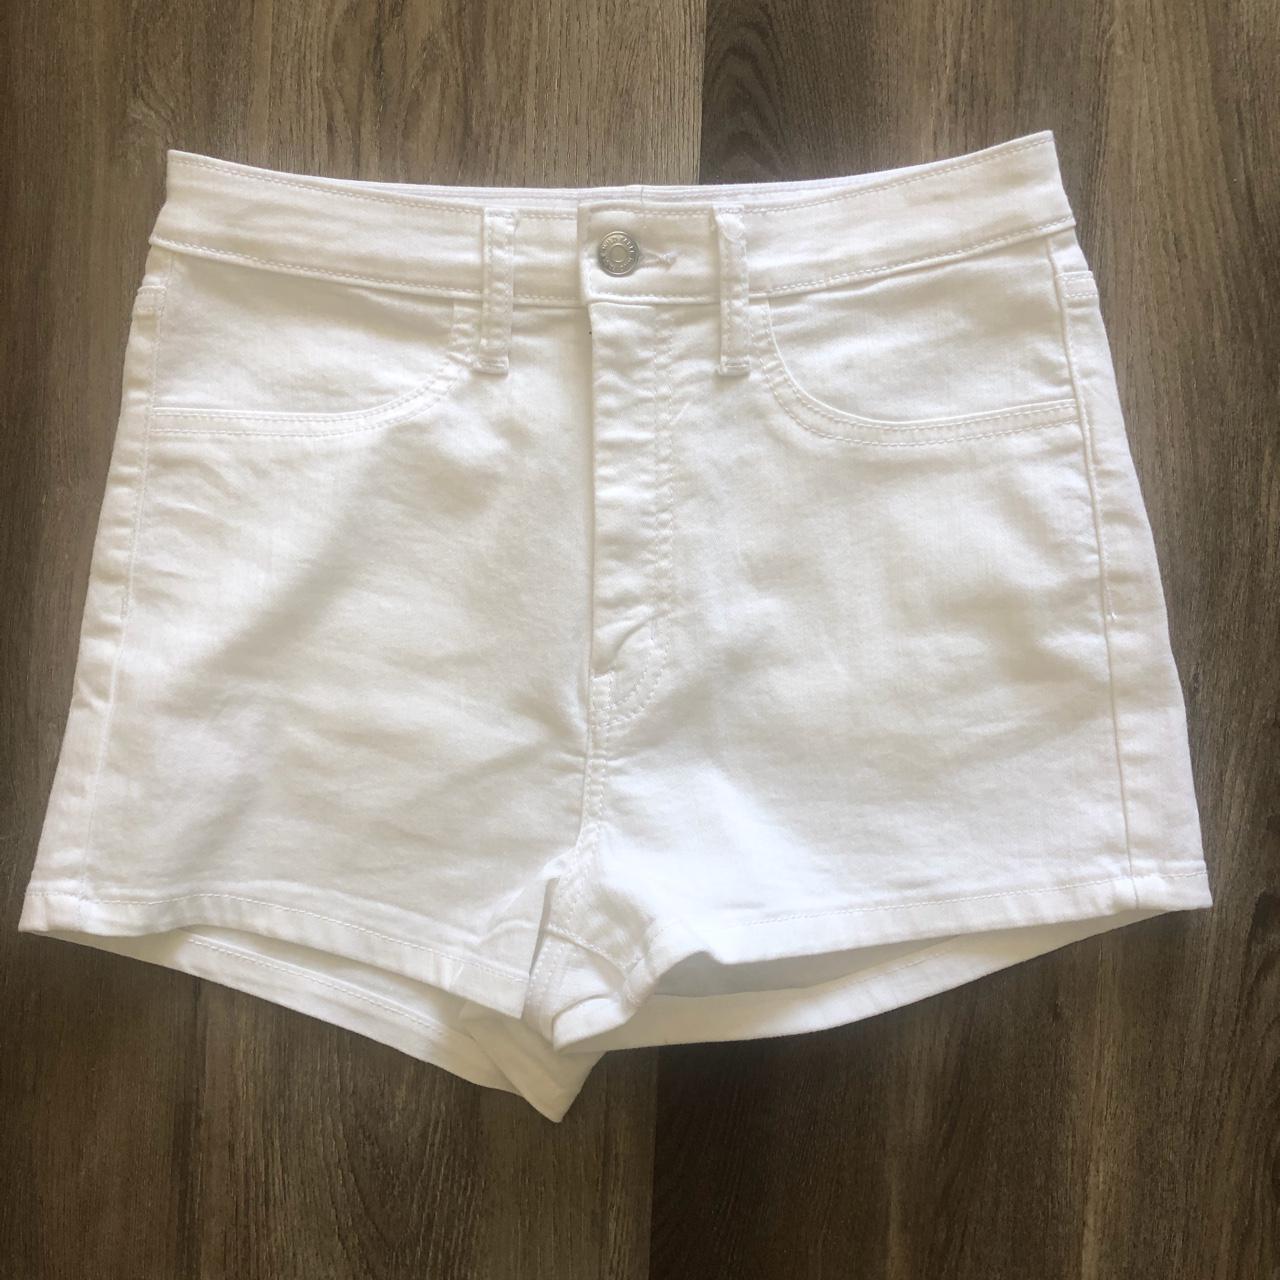 Wild fable white denim high rise shorts Labeled as... - Depop